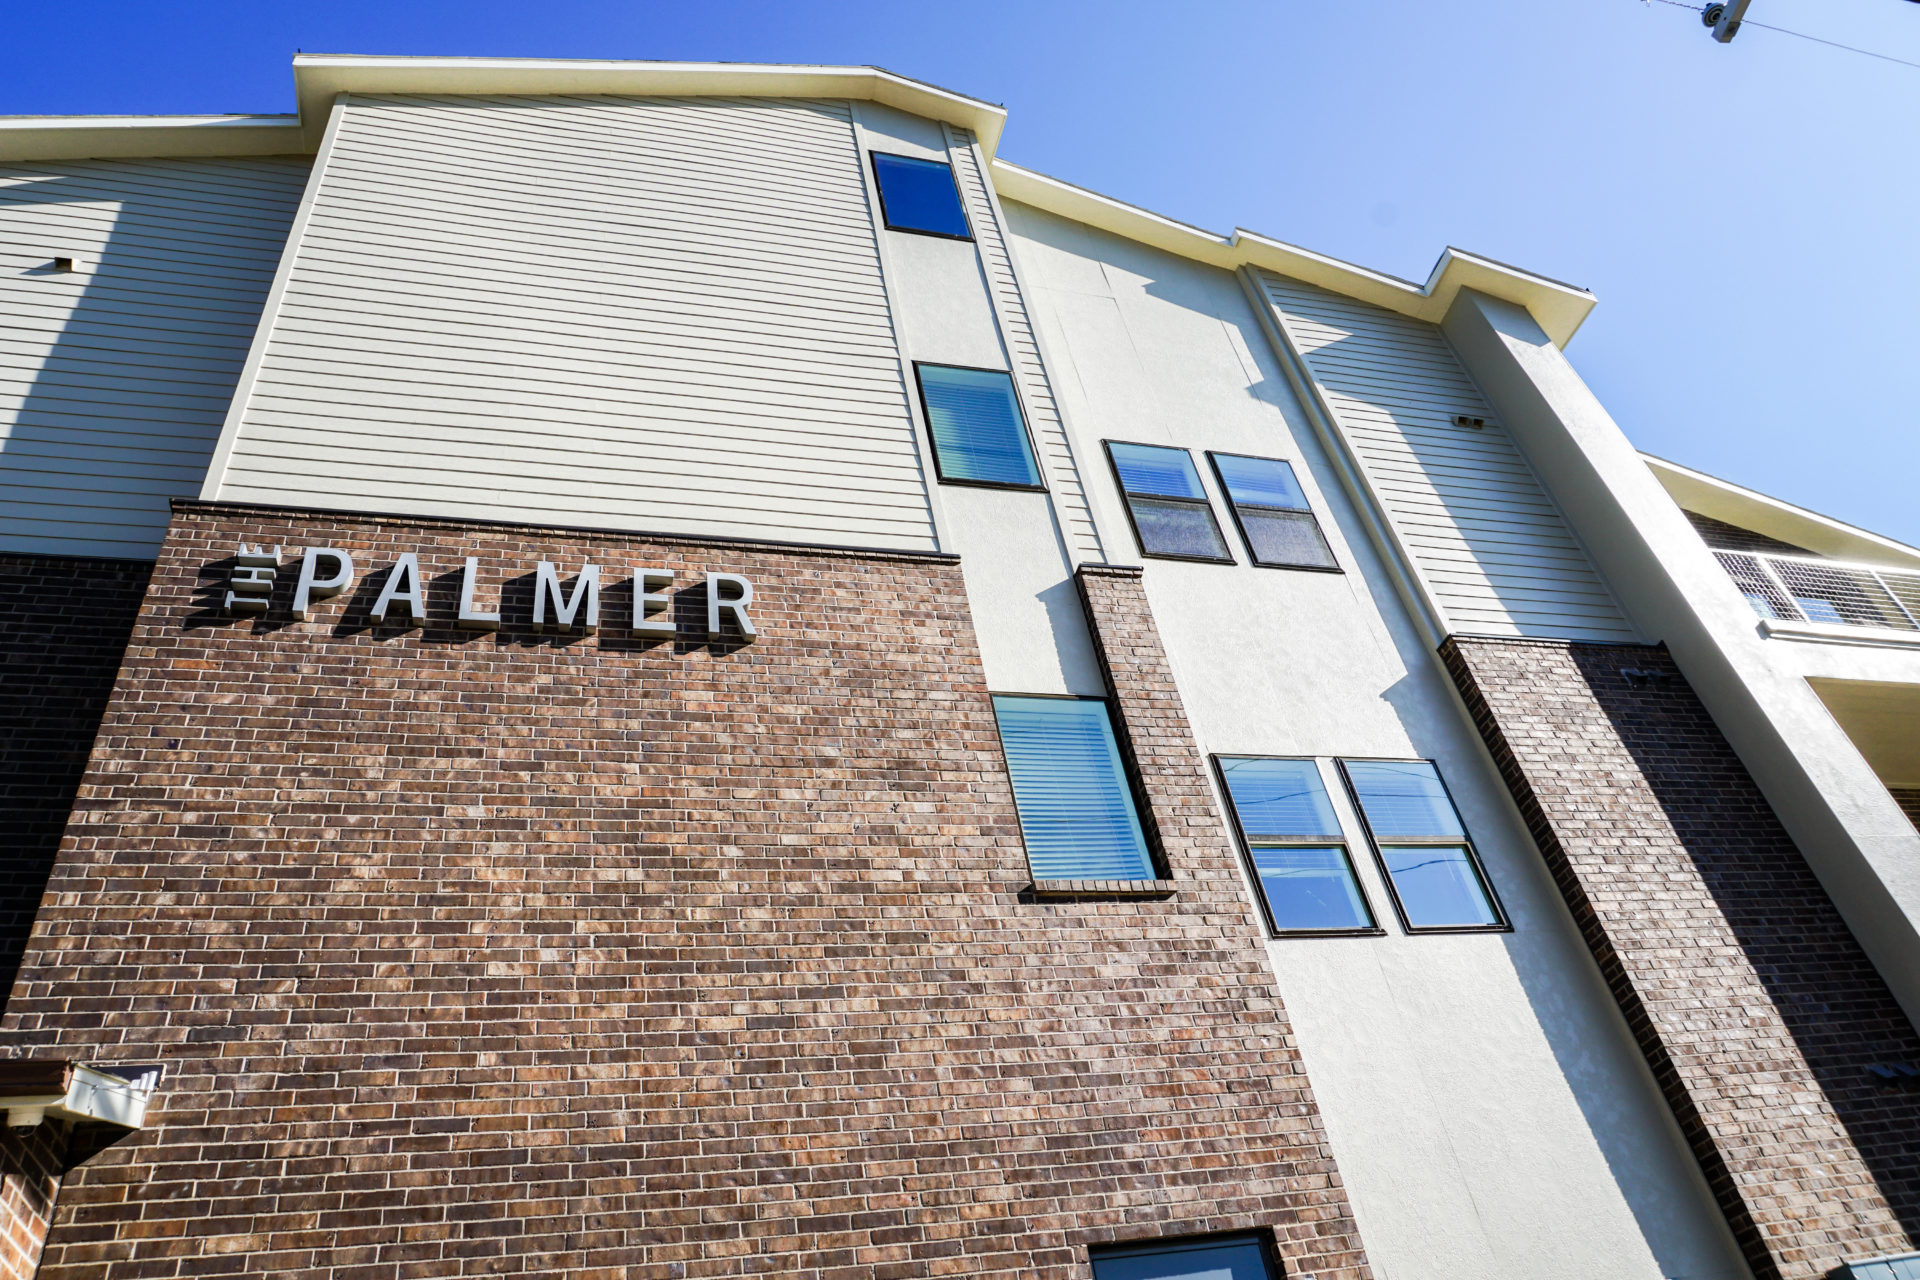 Exterior, close-up view of the red and brown brick with grey lettering that says "The Palmer" on the side of the building